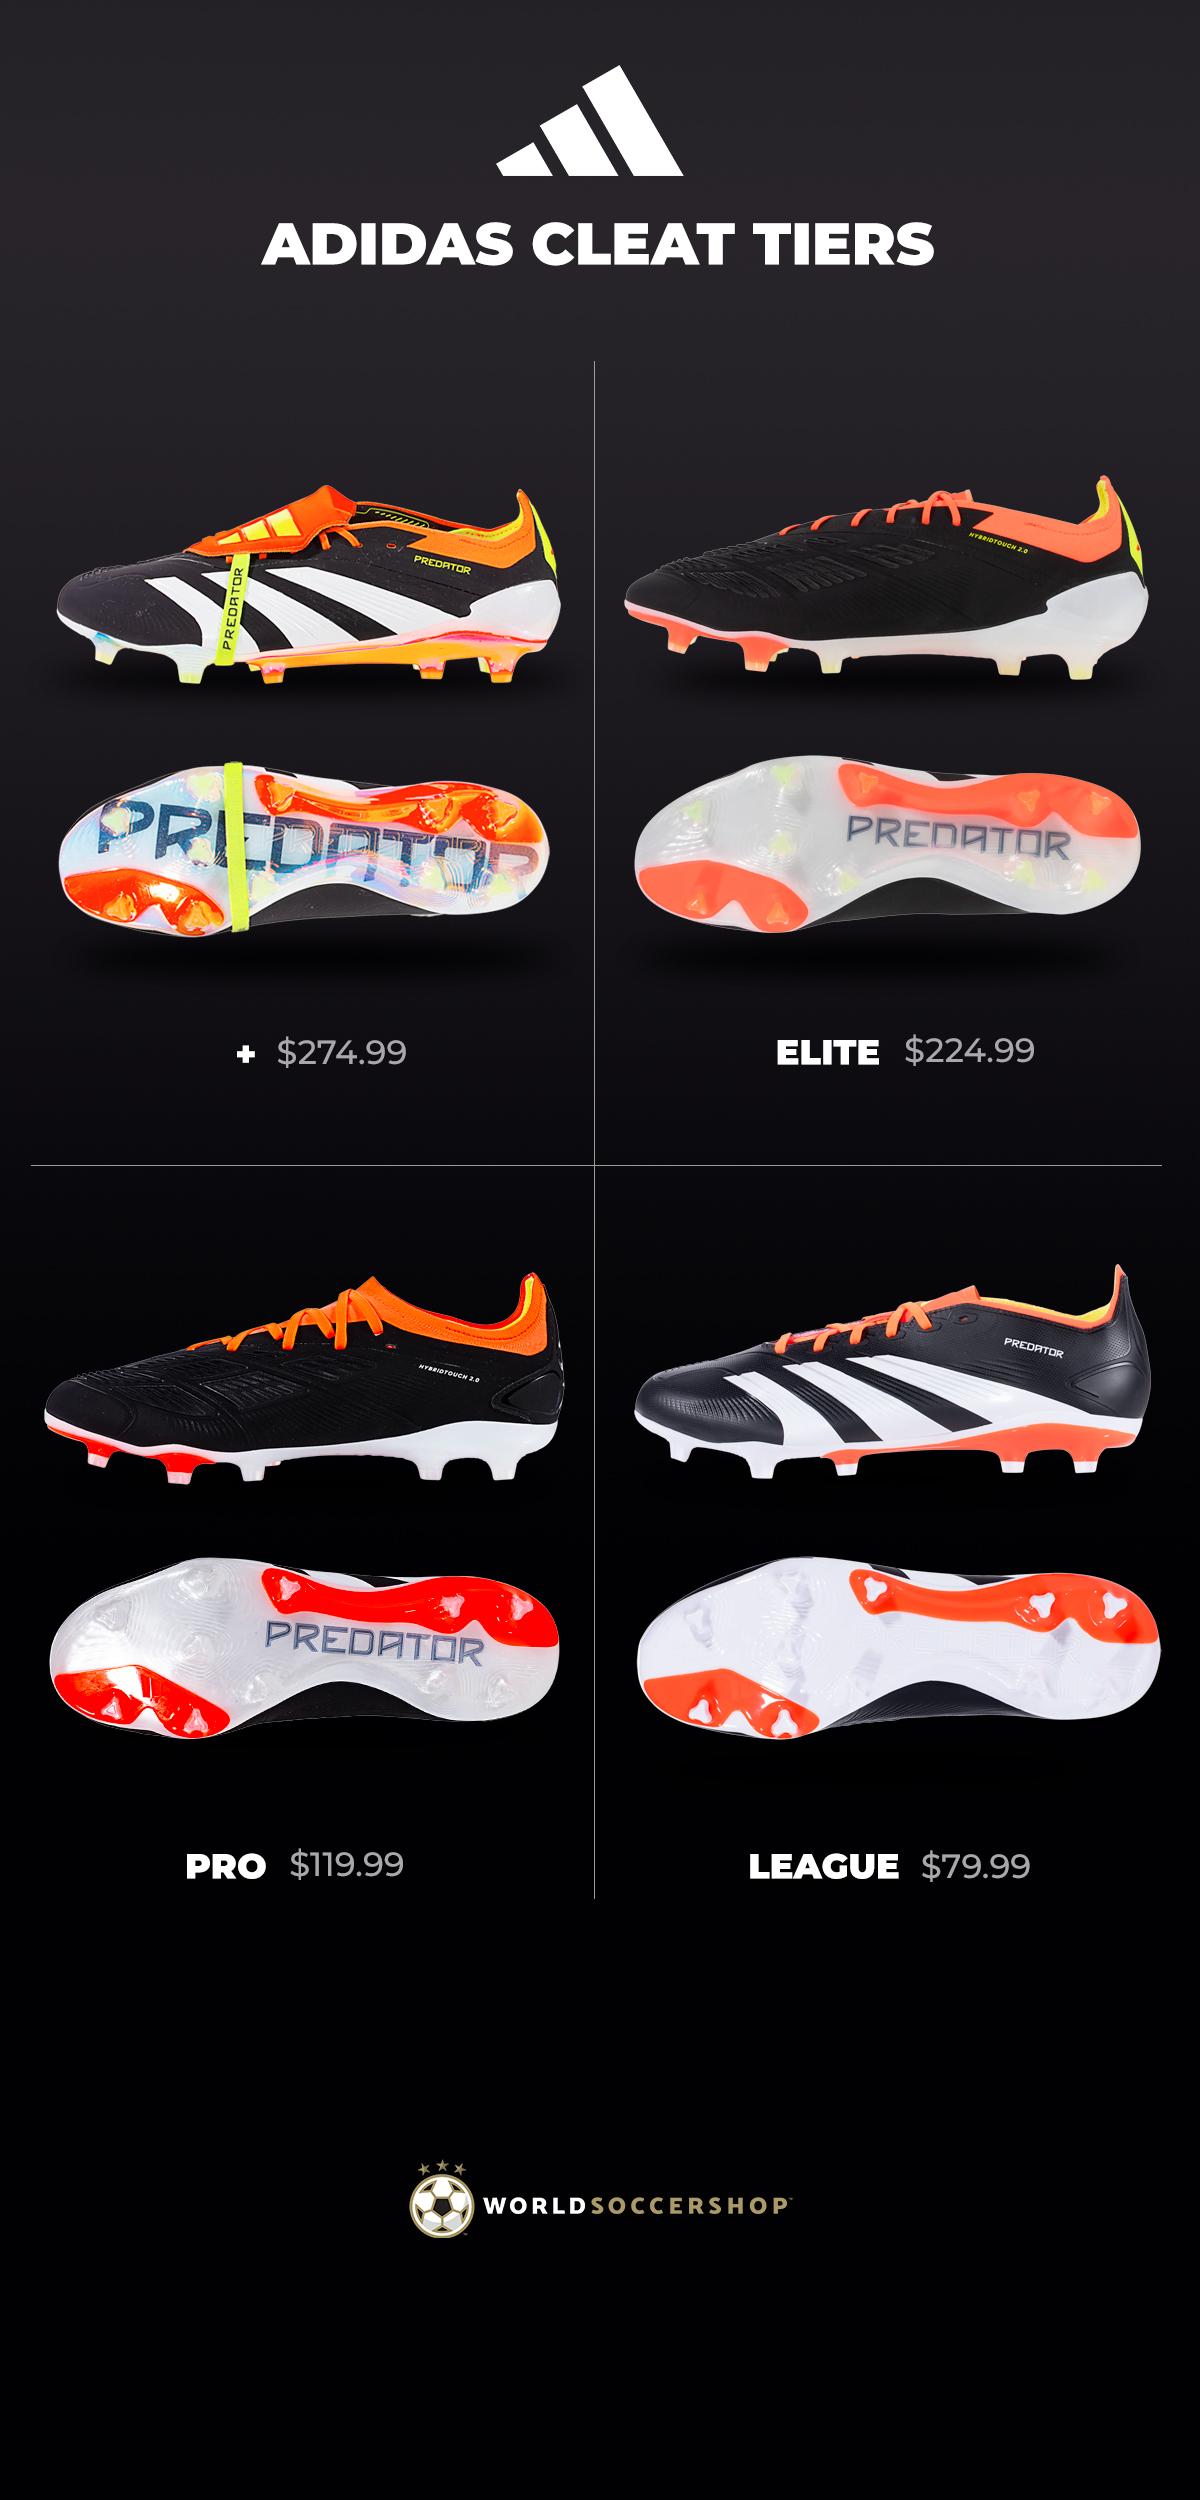 adidas cleat tiers